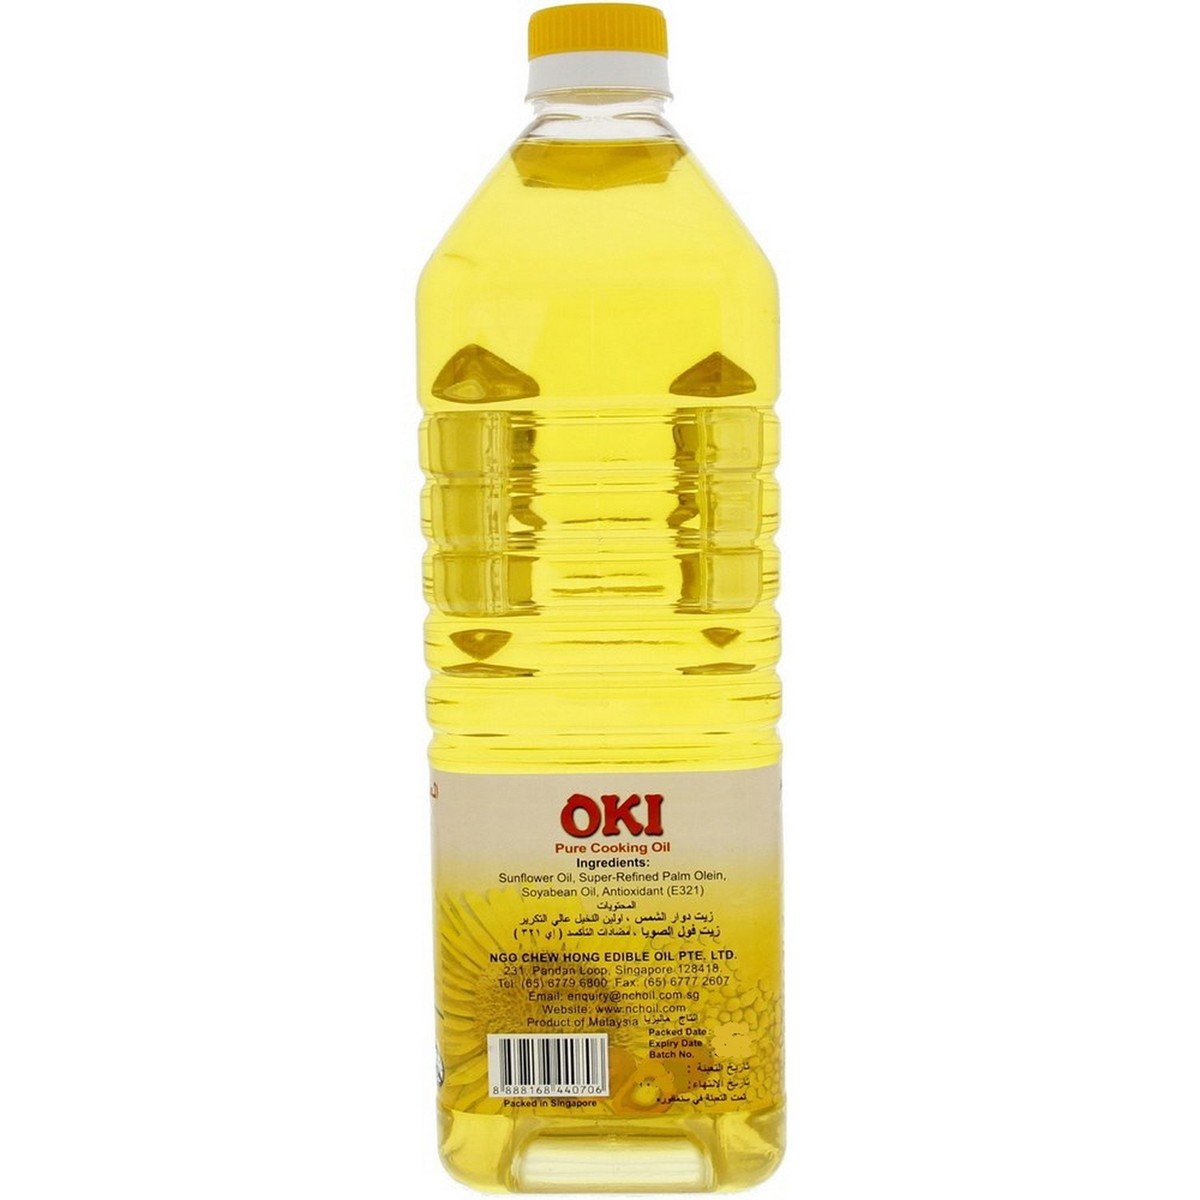 Oki Pure Cooking Oil 1.8 Litres